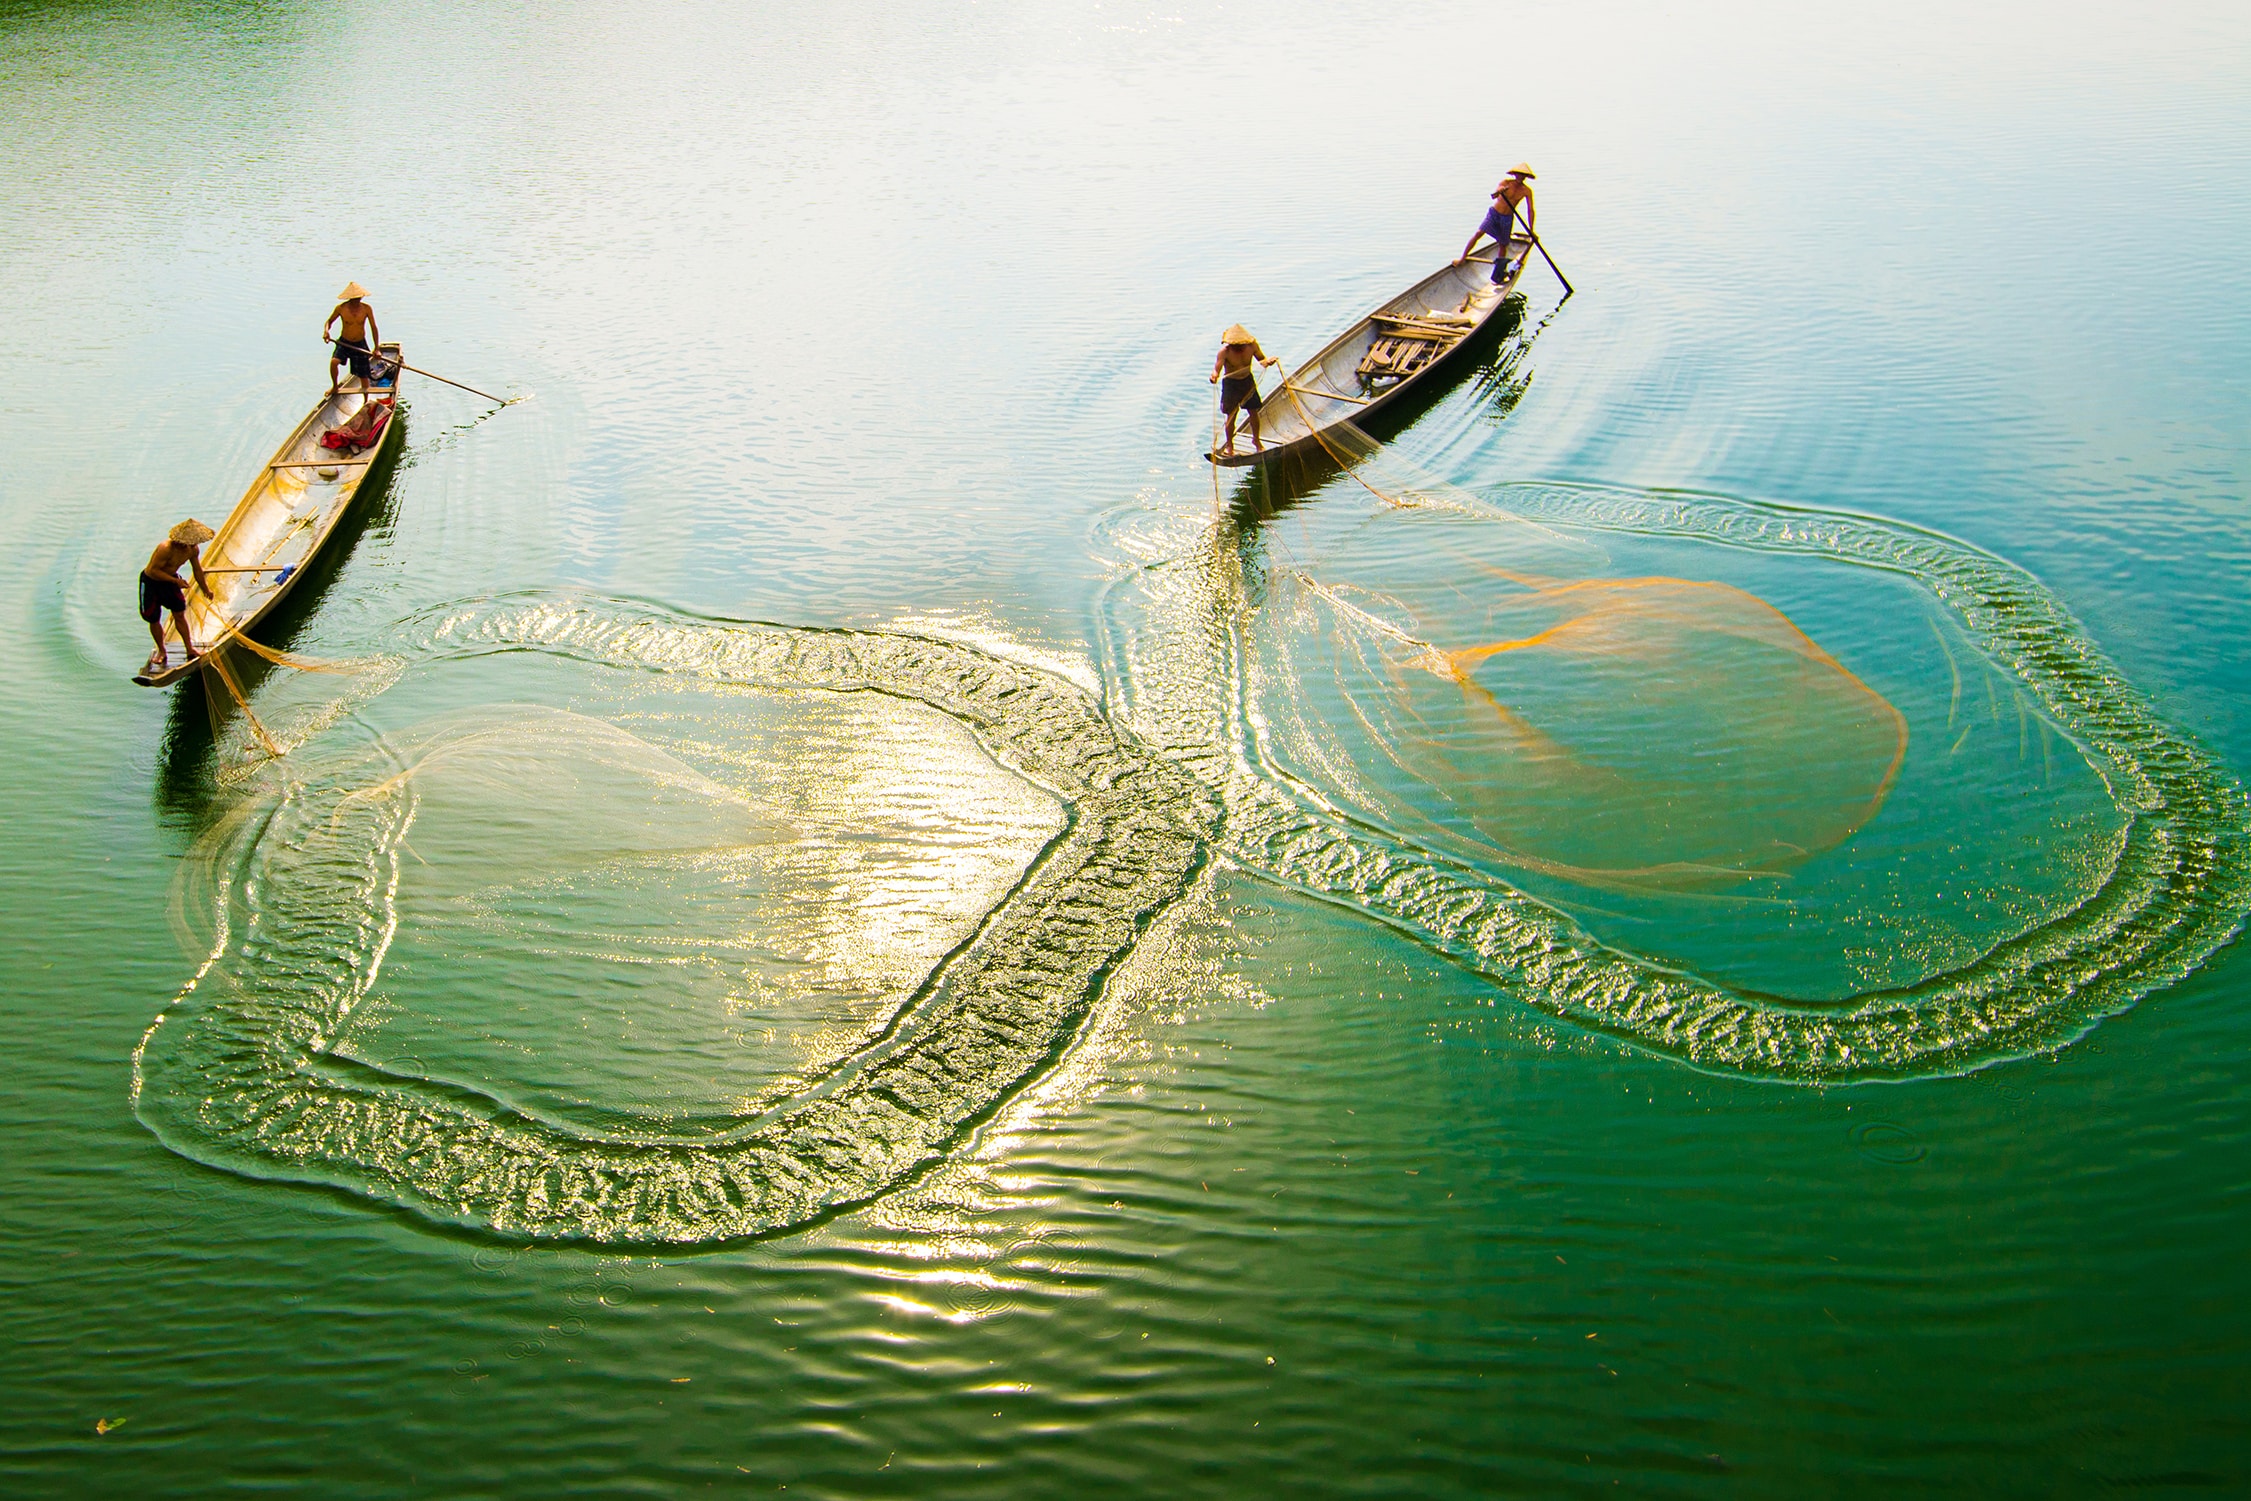 Local people casting fishing nets from their canoes